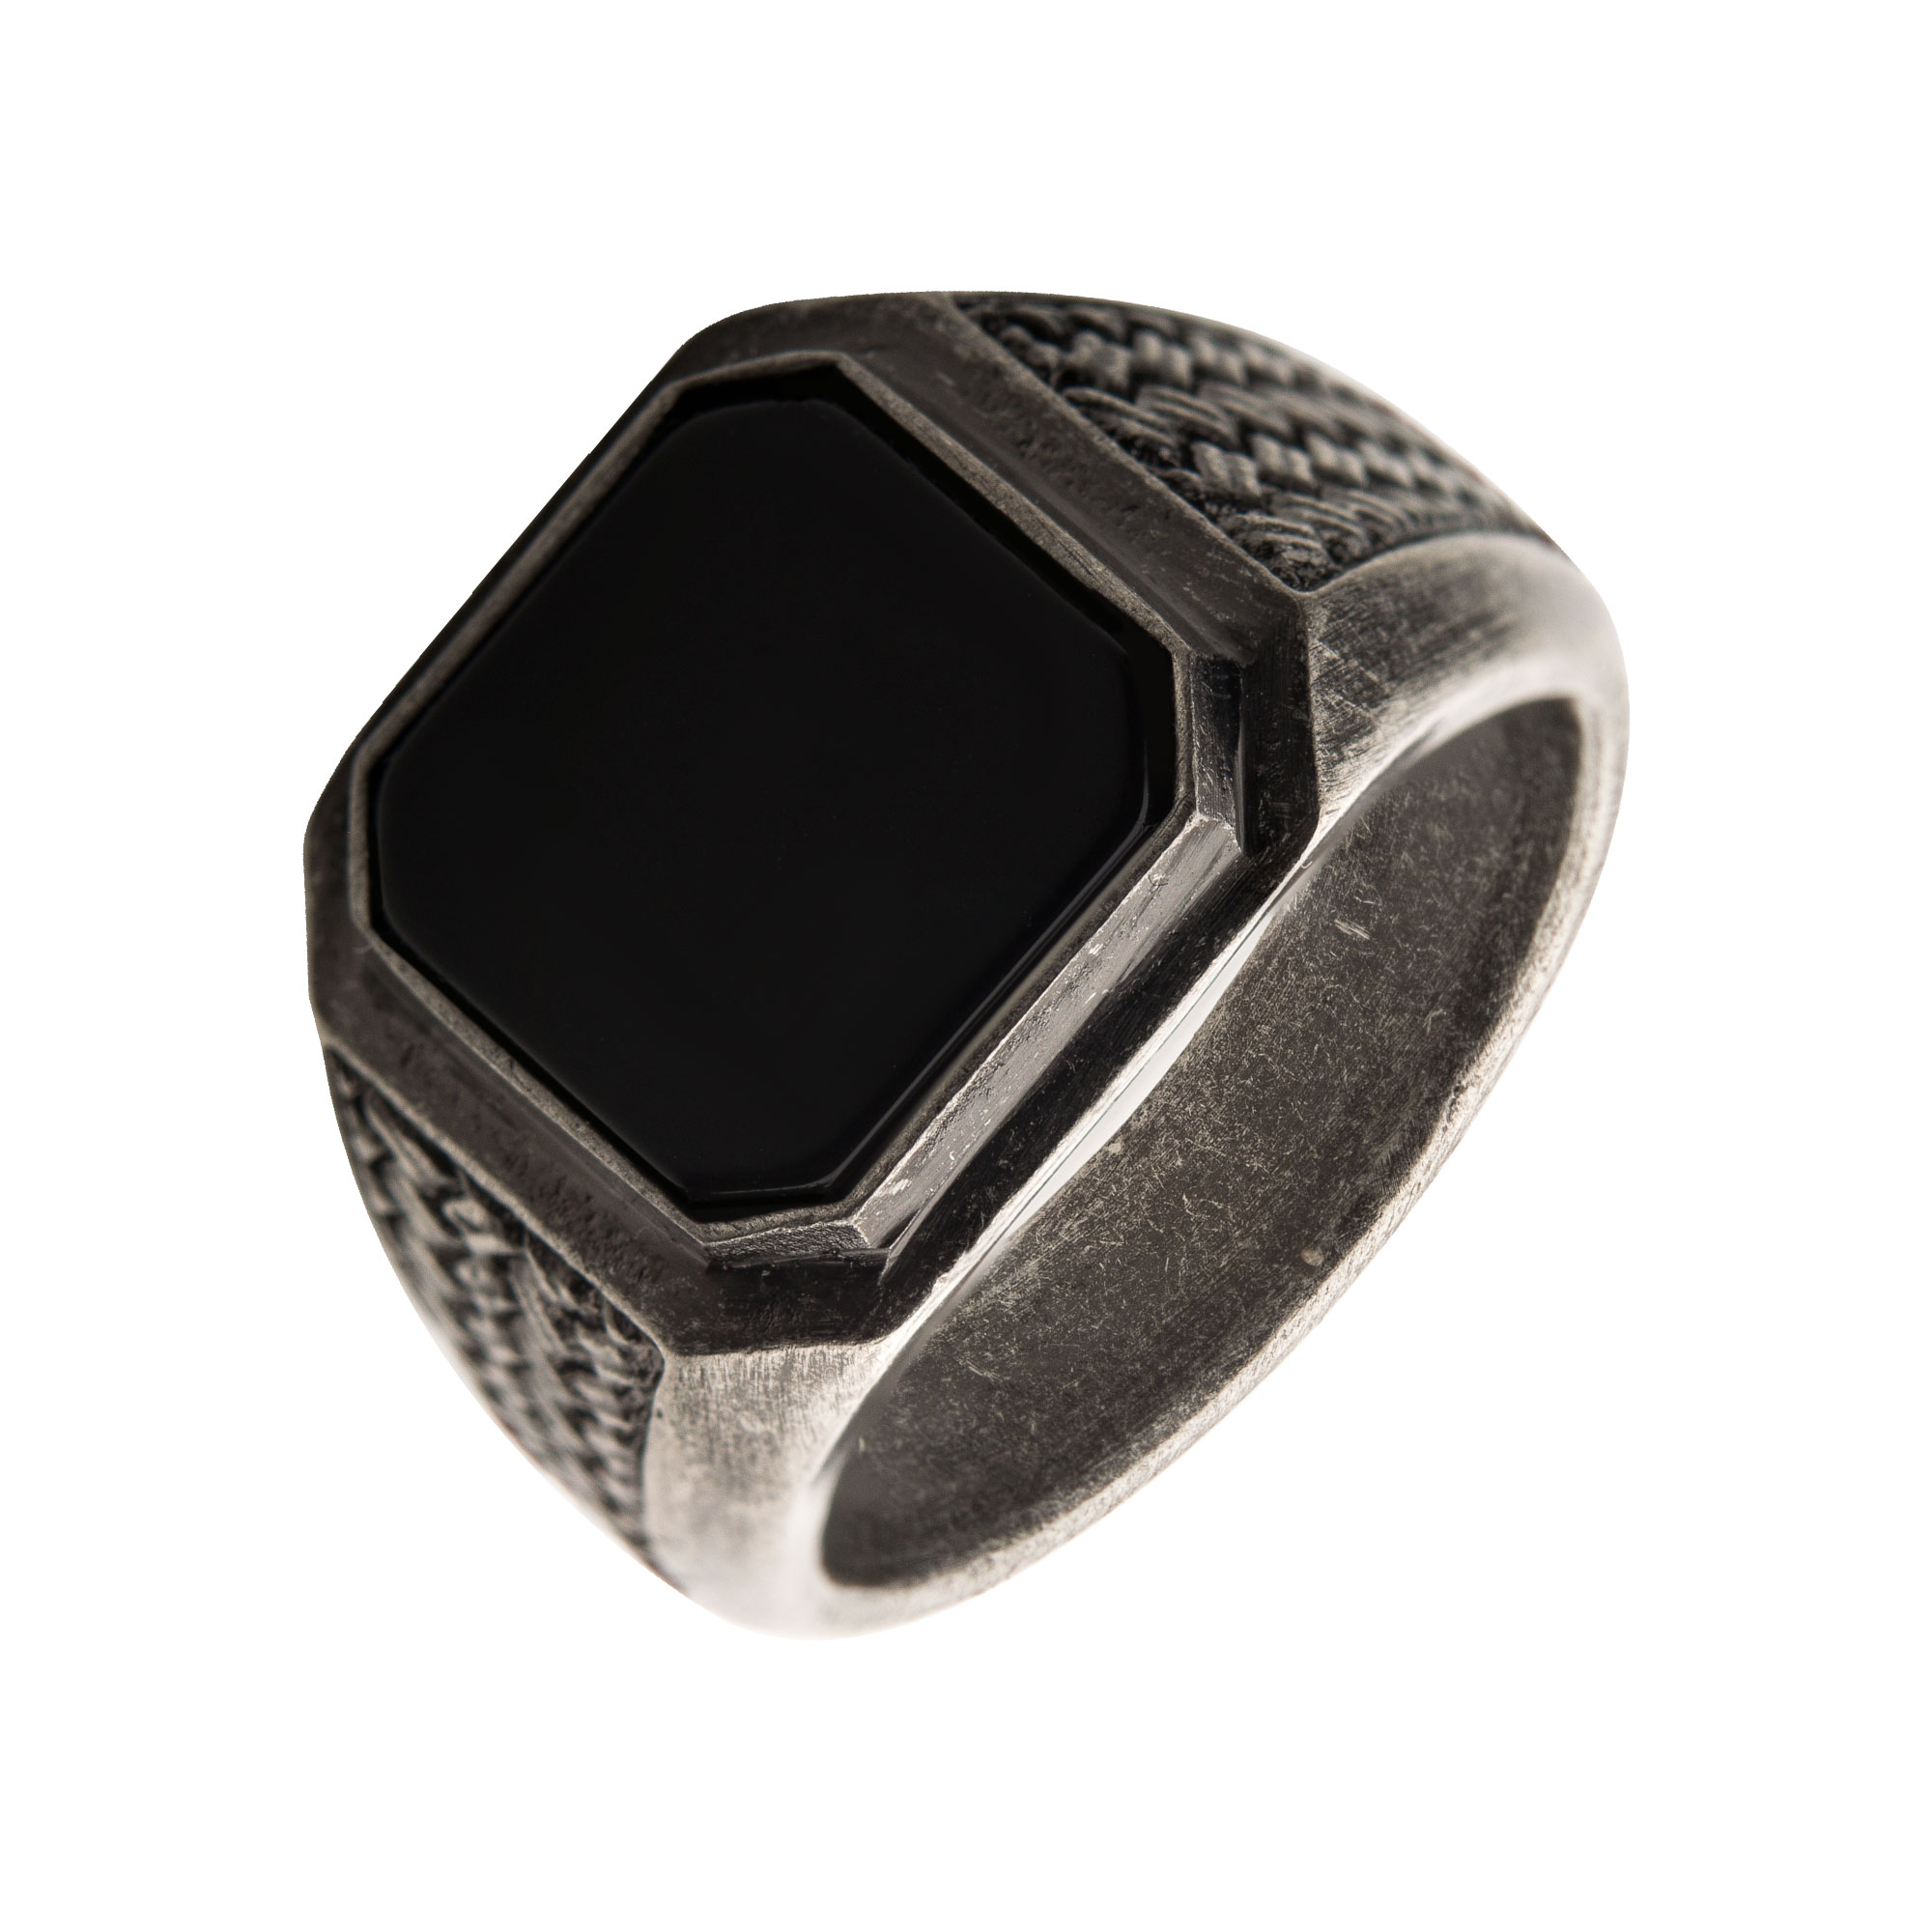 Stainless Steel Silver Plated with Black Agate Stone Ring Lewis Jewelers, Inc. Ansonia, CT